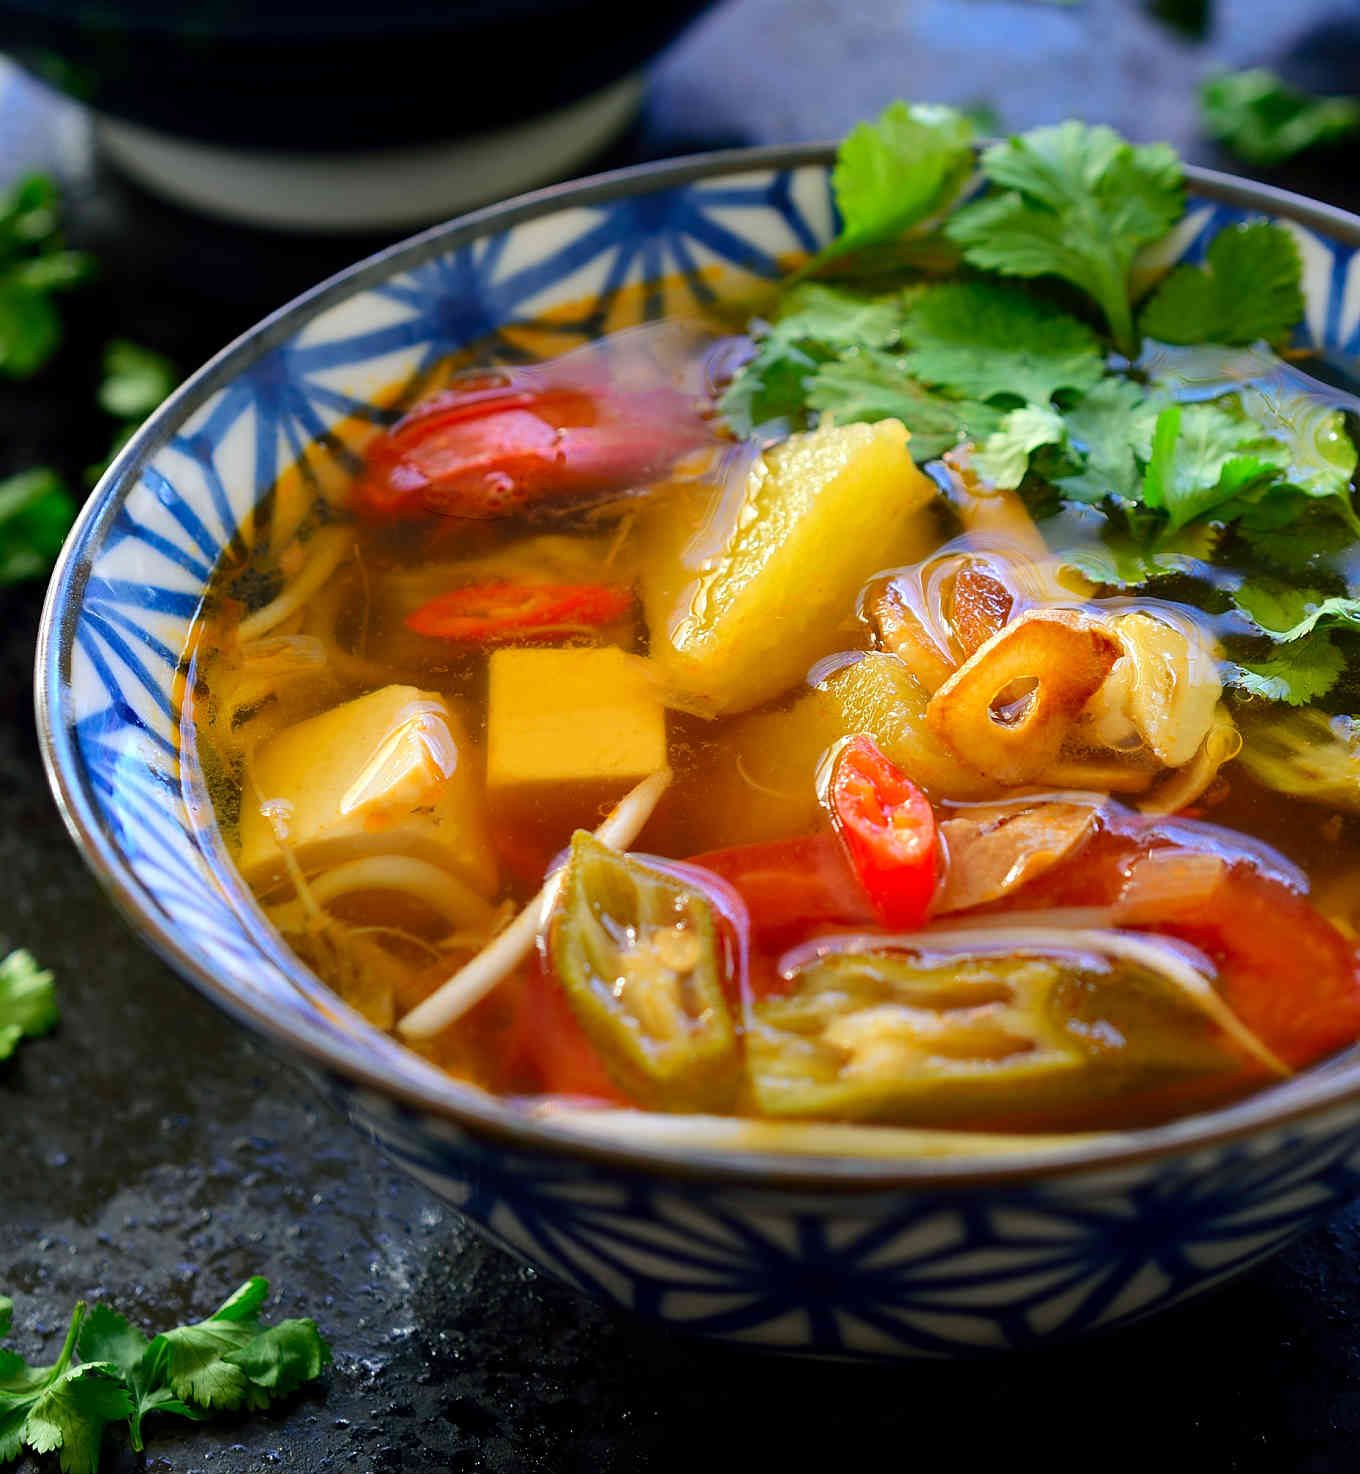 This Vietnamese sour soup recipe is ready in just 15 minutes and so full of complex flavours and textures that it just might be the most delicious bowl of soup you’ve ever tasted. This is a vegetarian version of canh chua with tamarind, pineapple, okra and silken tofu. The combination seems weird but I’m sure it will quickly become your new favourite soup!